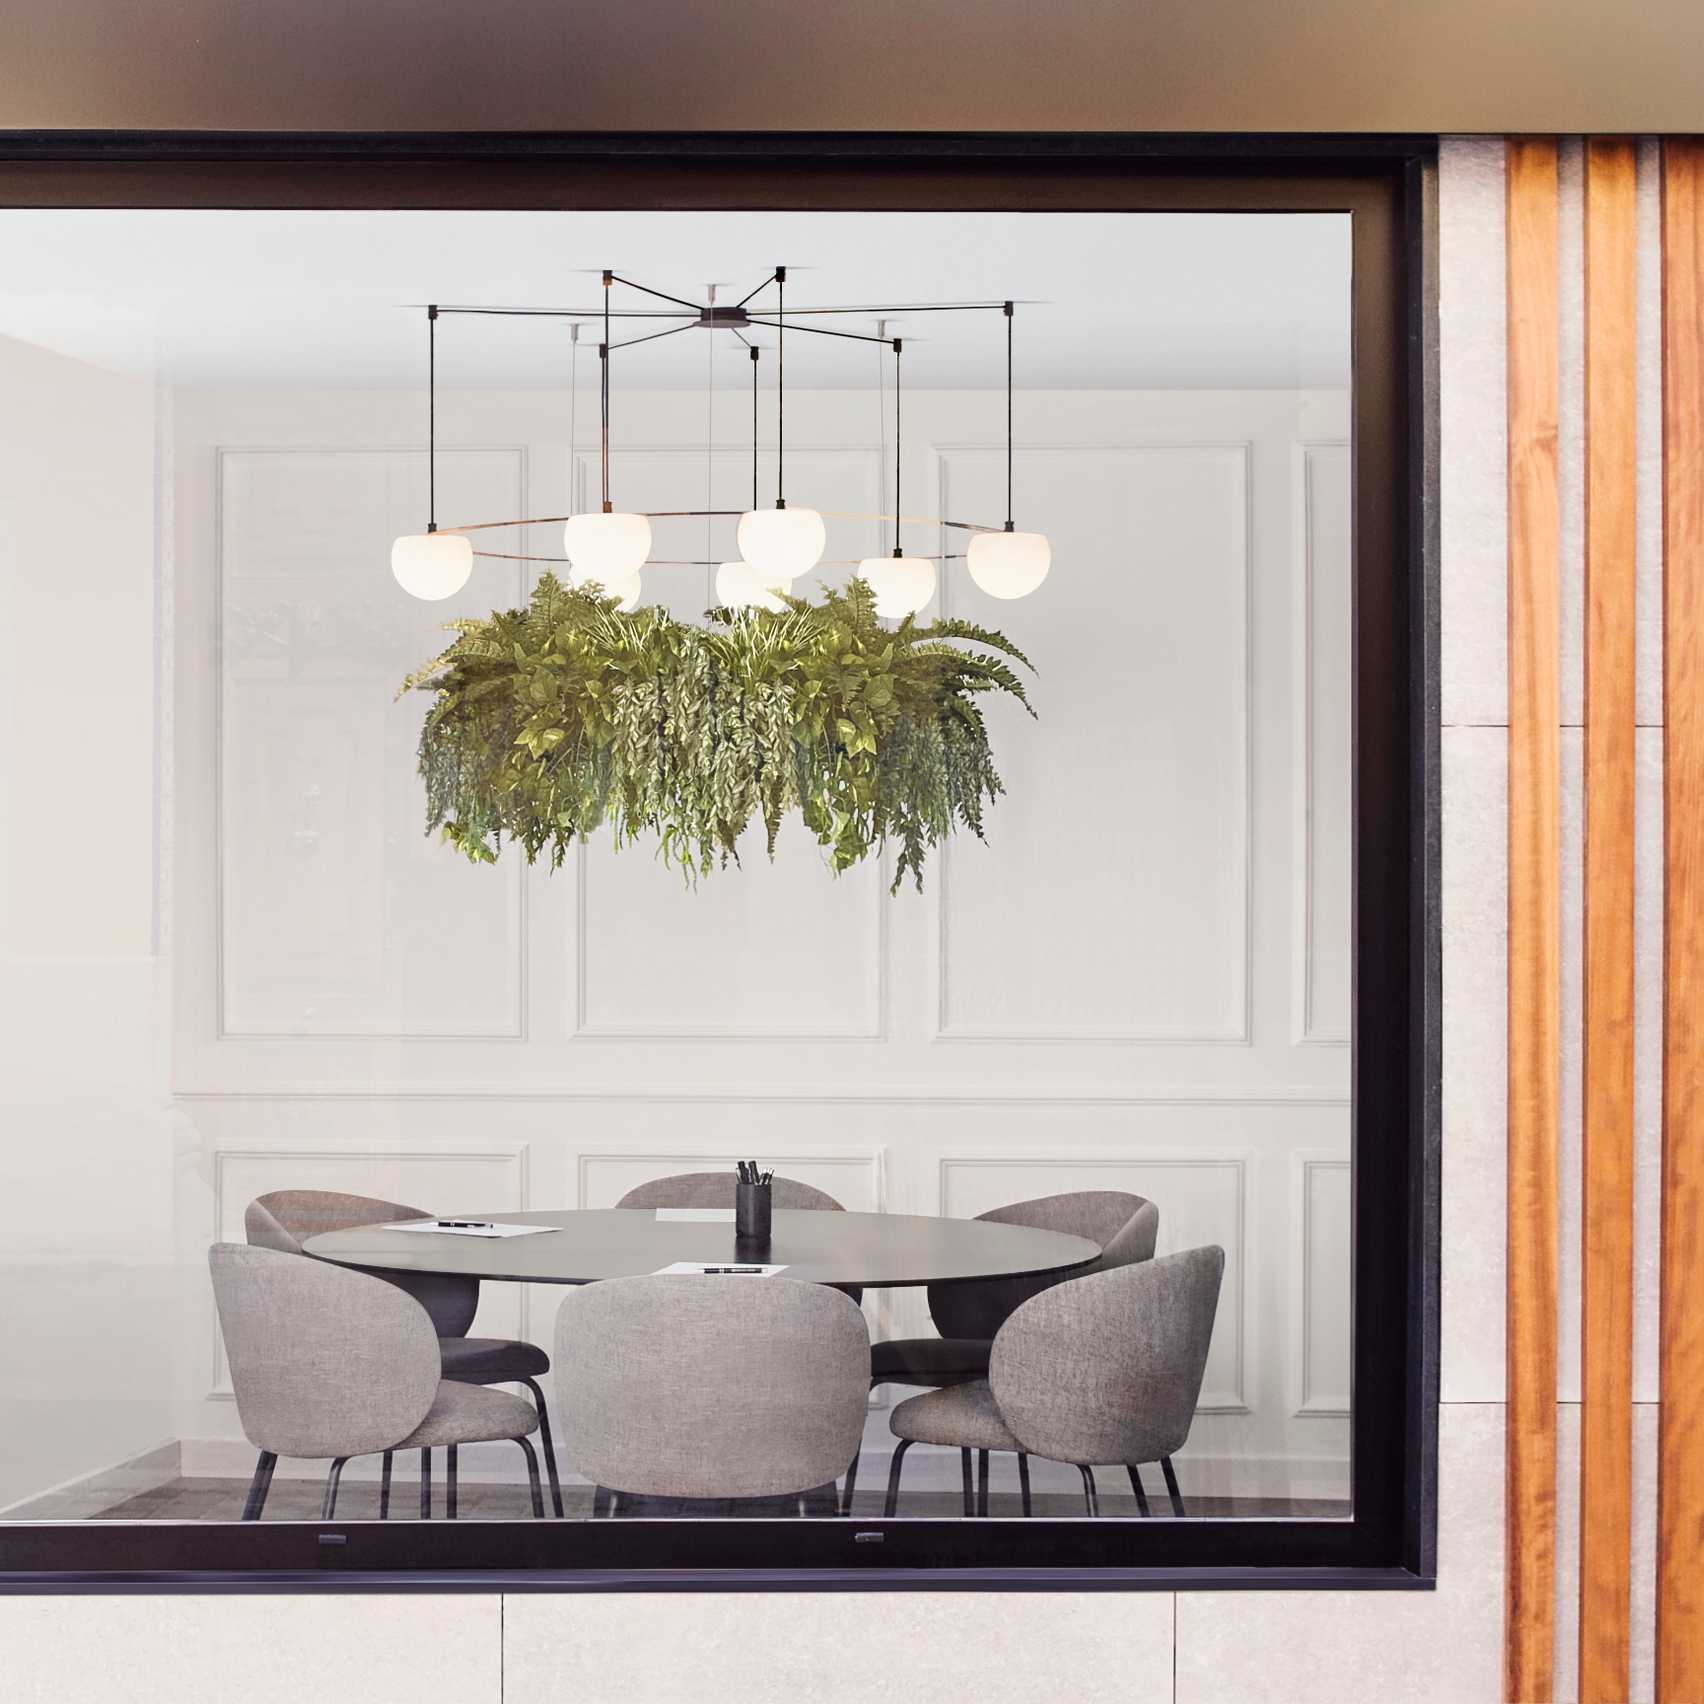 Circ pendant with planter hanging in an office meeting room